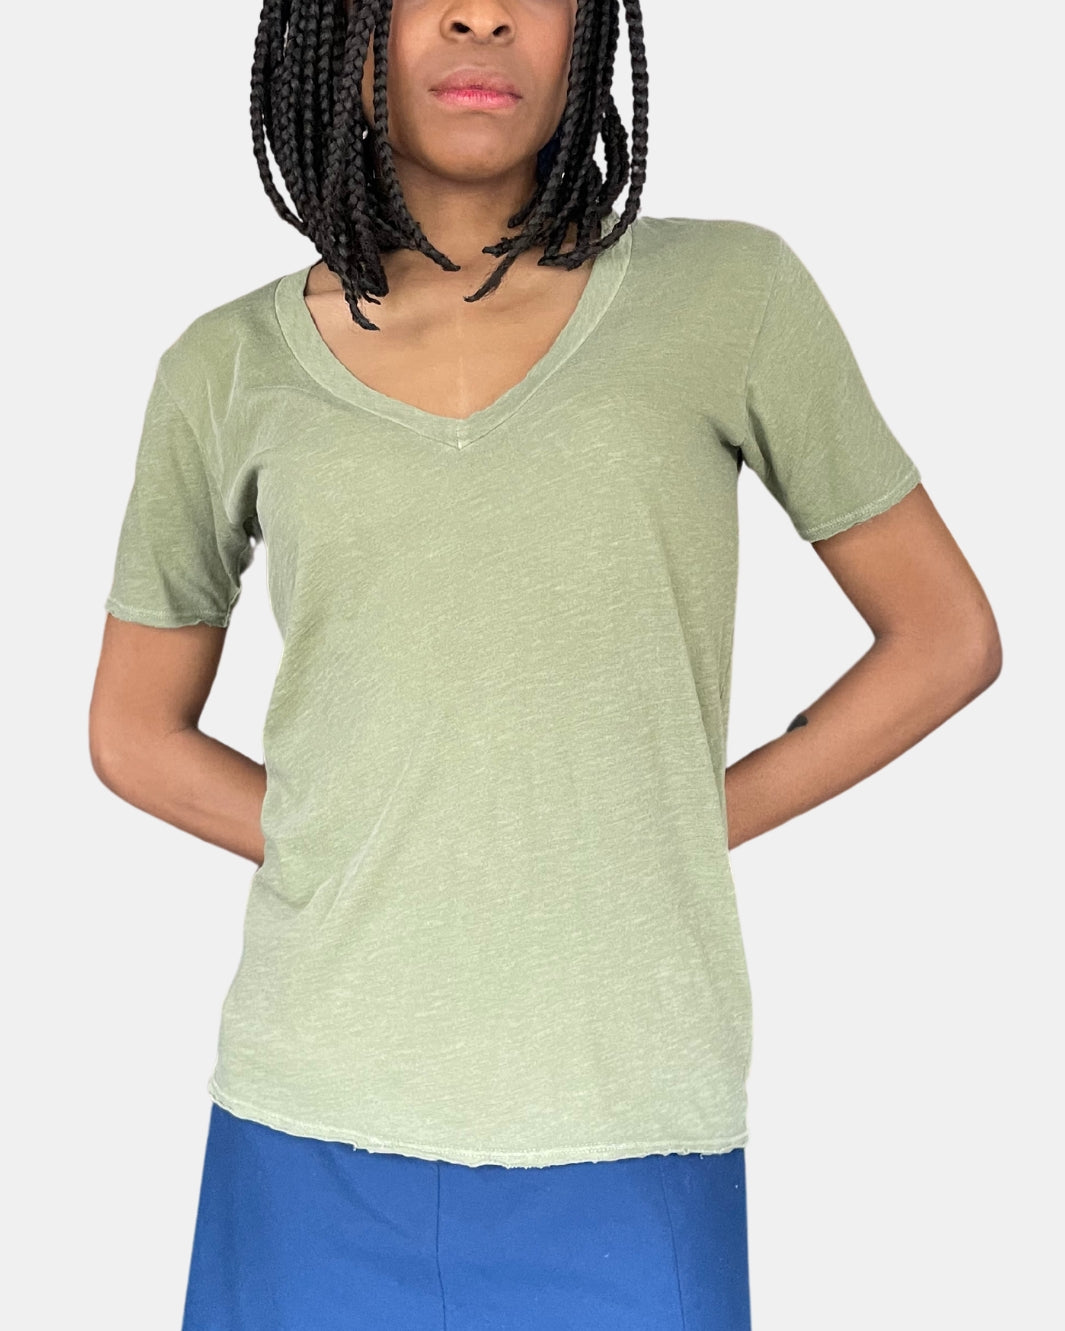 CORA V NECK IN DUSTY GREEN - Romi Boutique